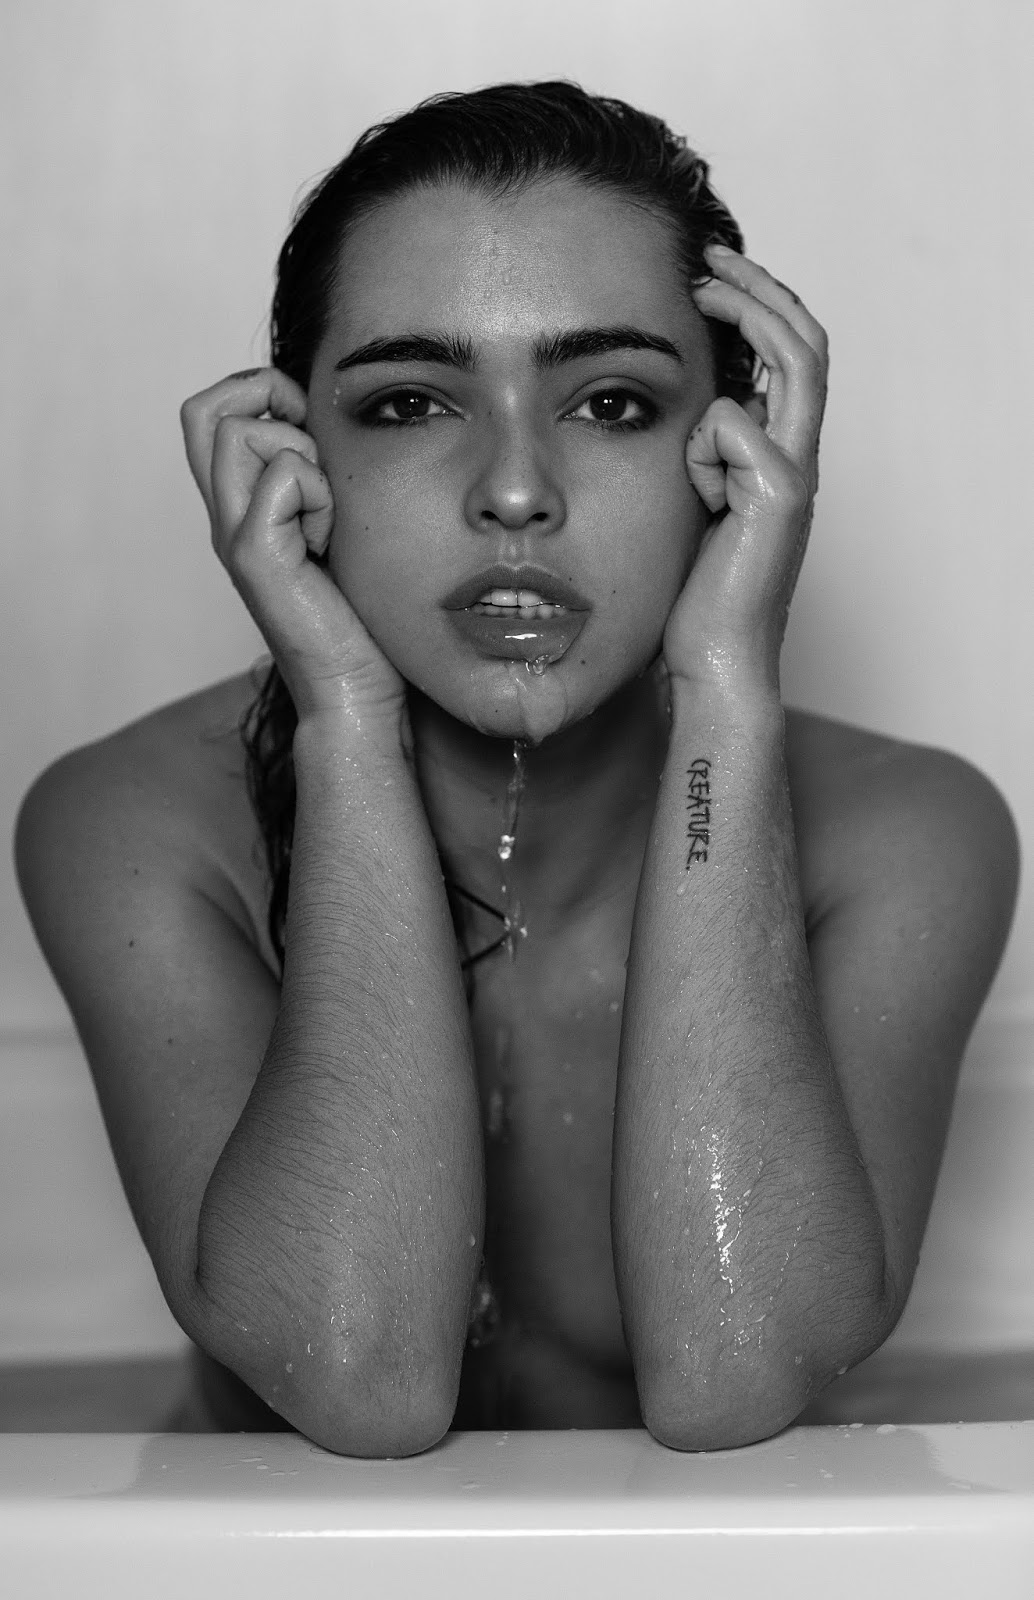 Lucy Vives - Naked Model Photoshoot by Kanobi A. Pollard.